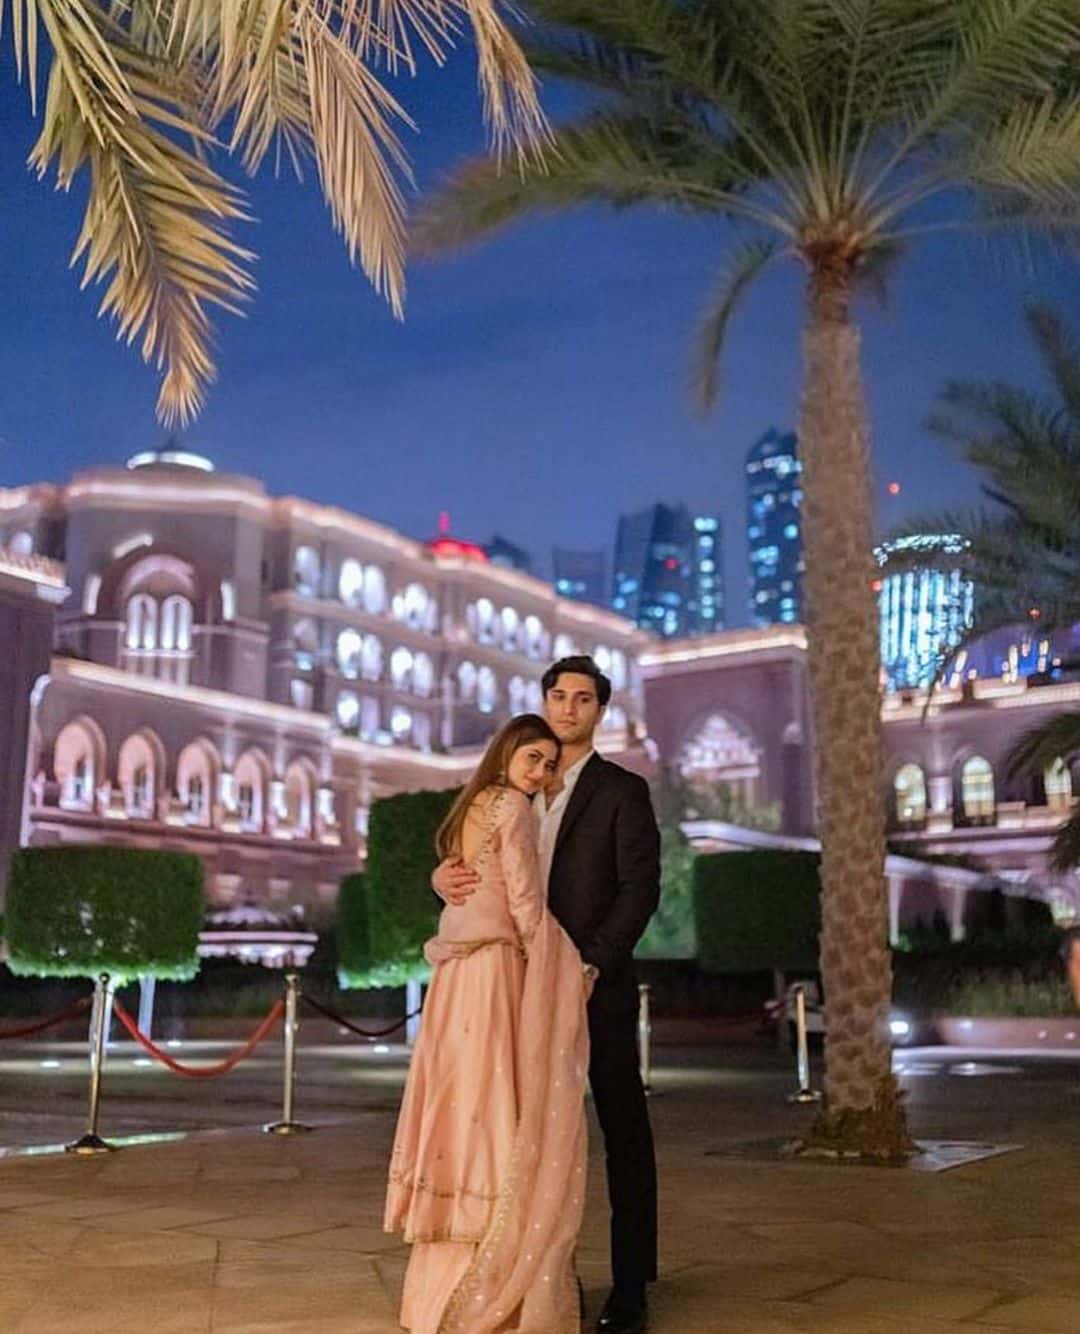 Latest Pictures of Newly Wed Couple Sajal and Ahad